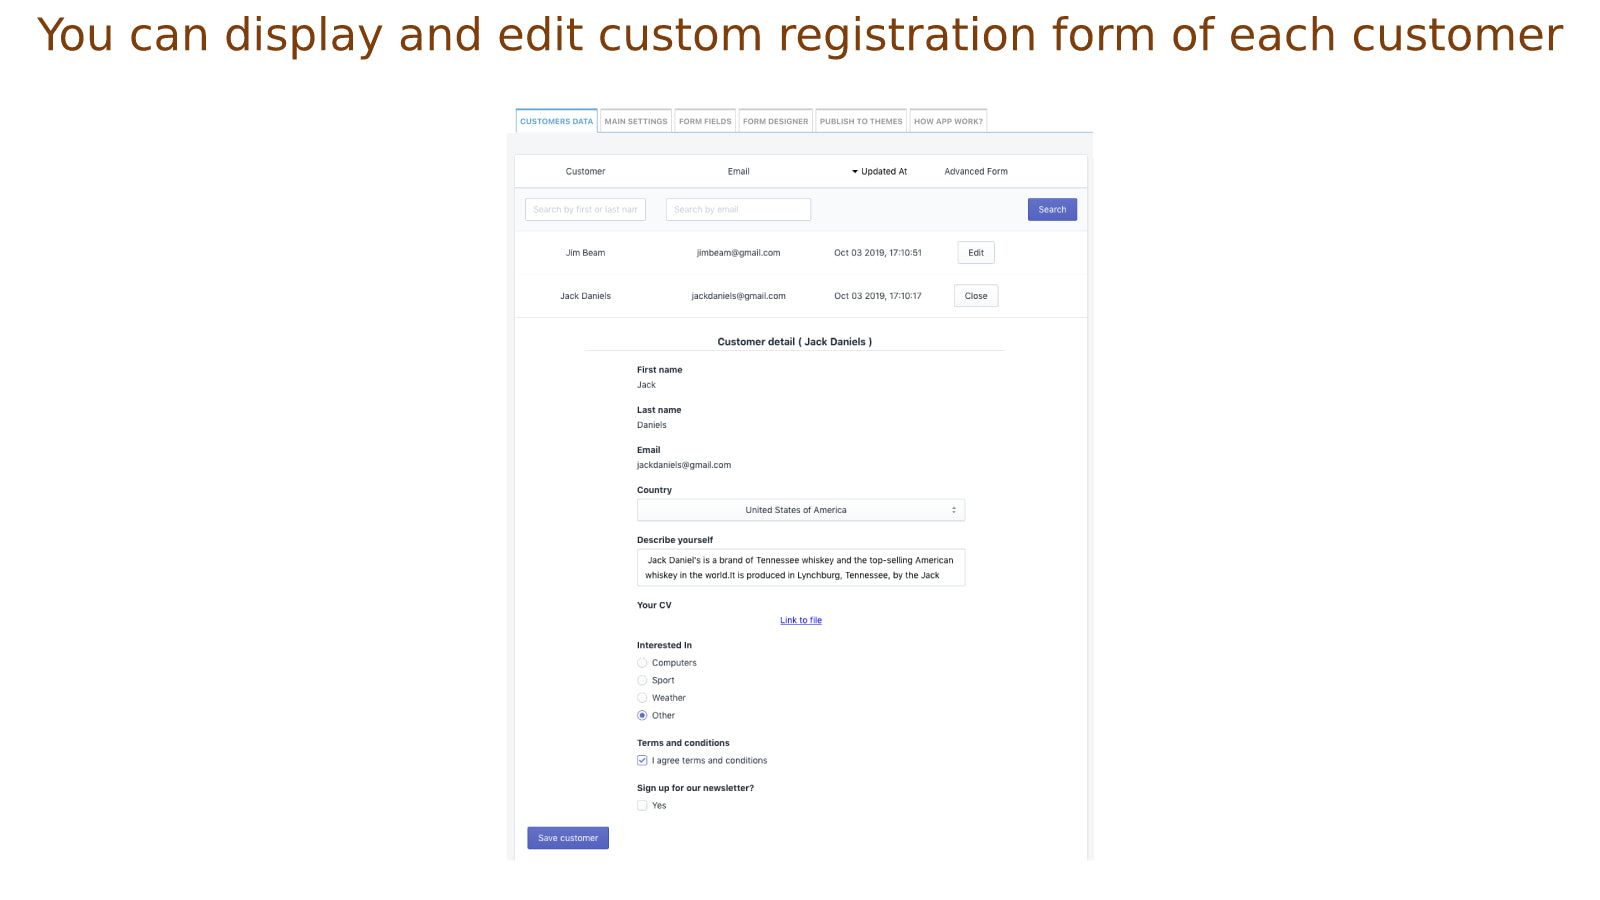 You can edit customer registration form for each customer 